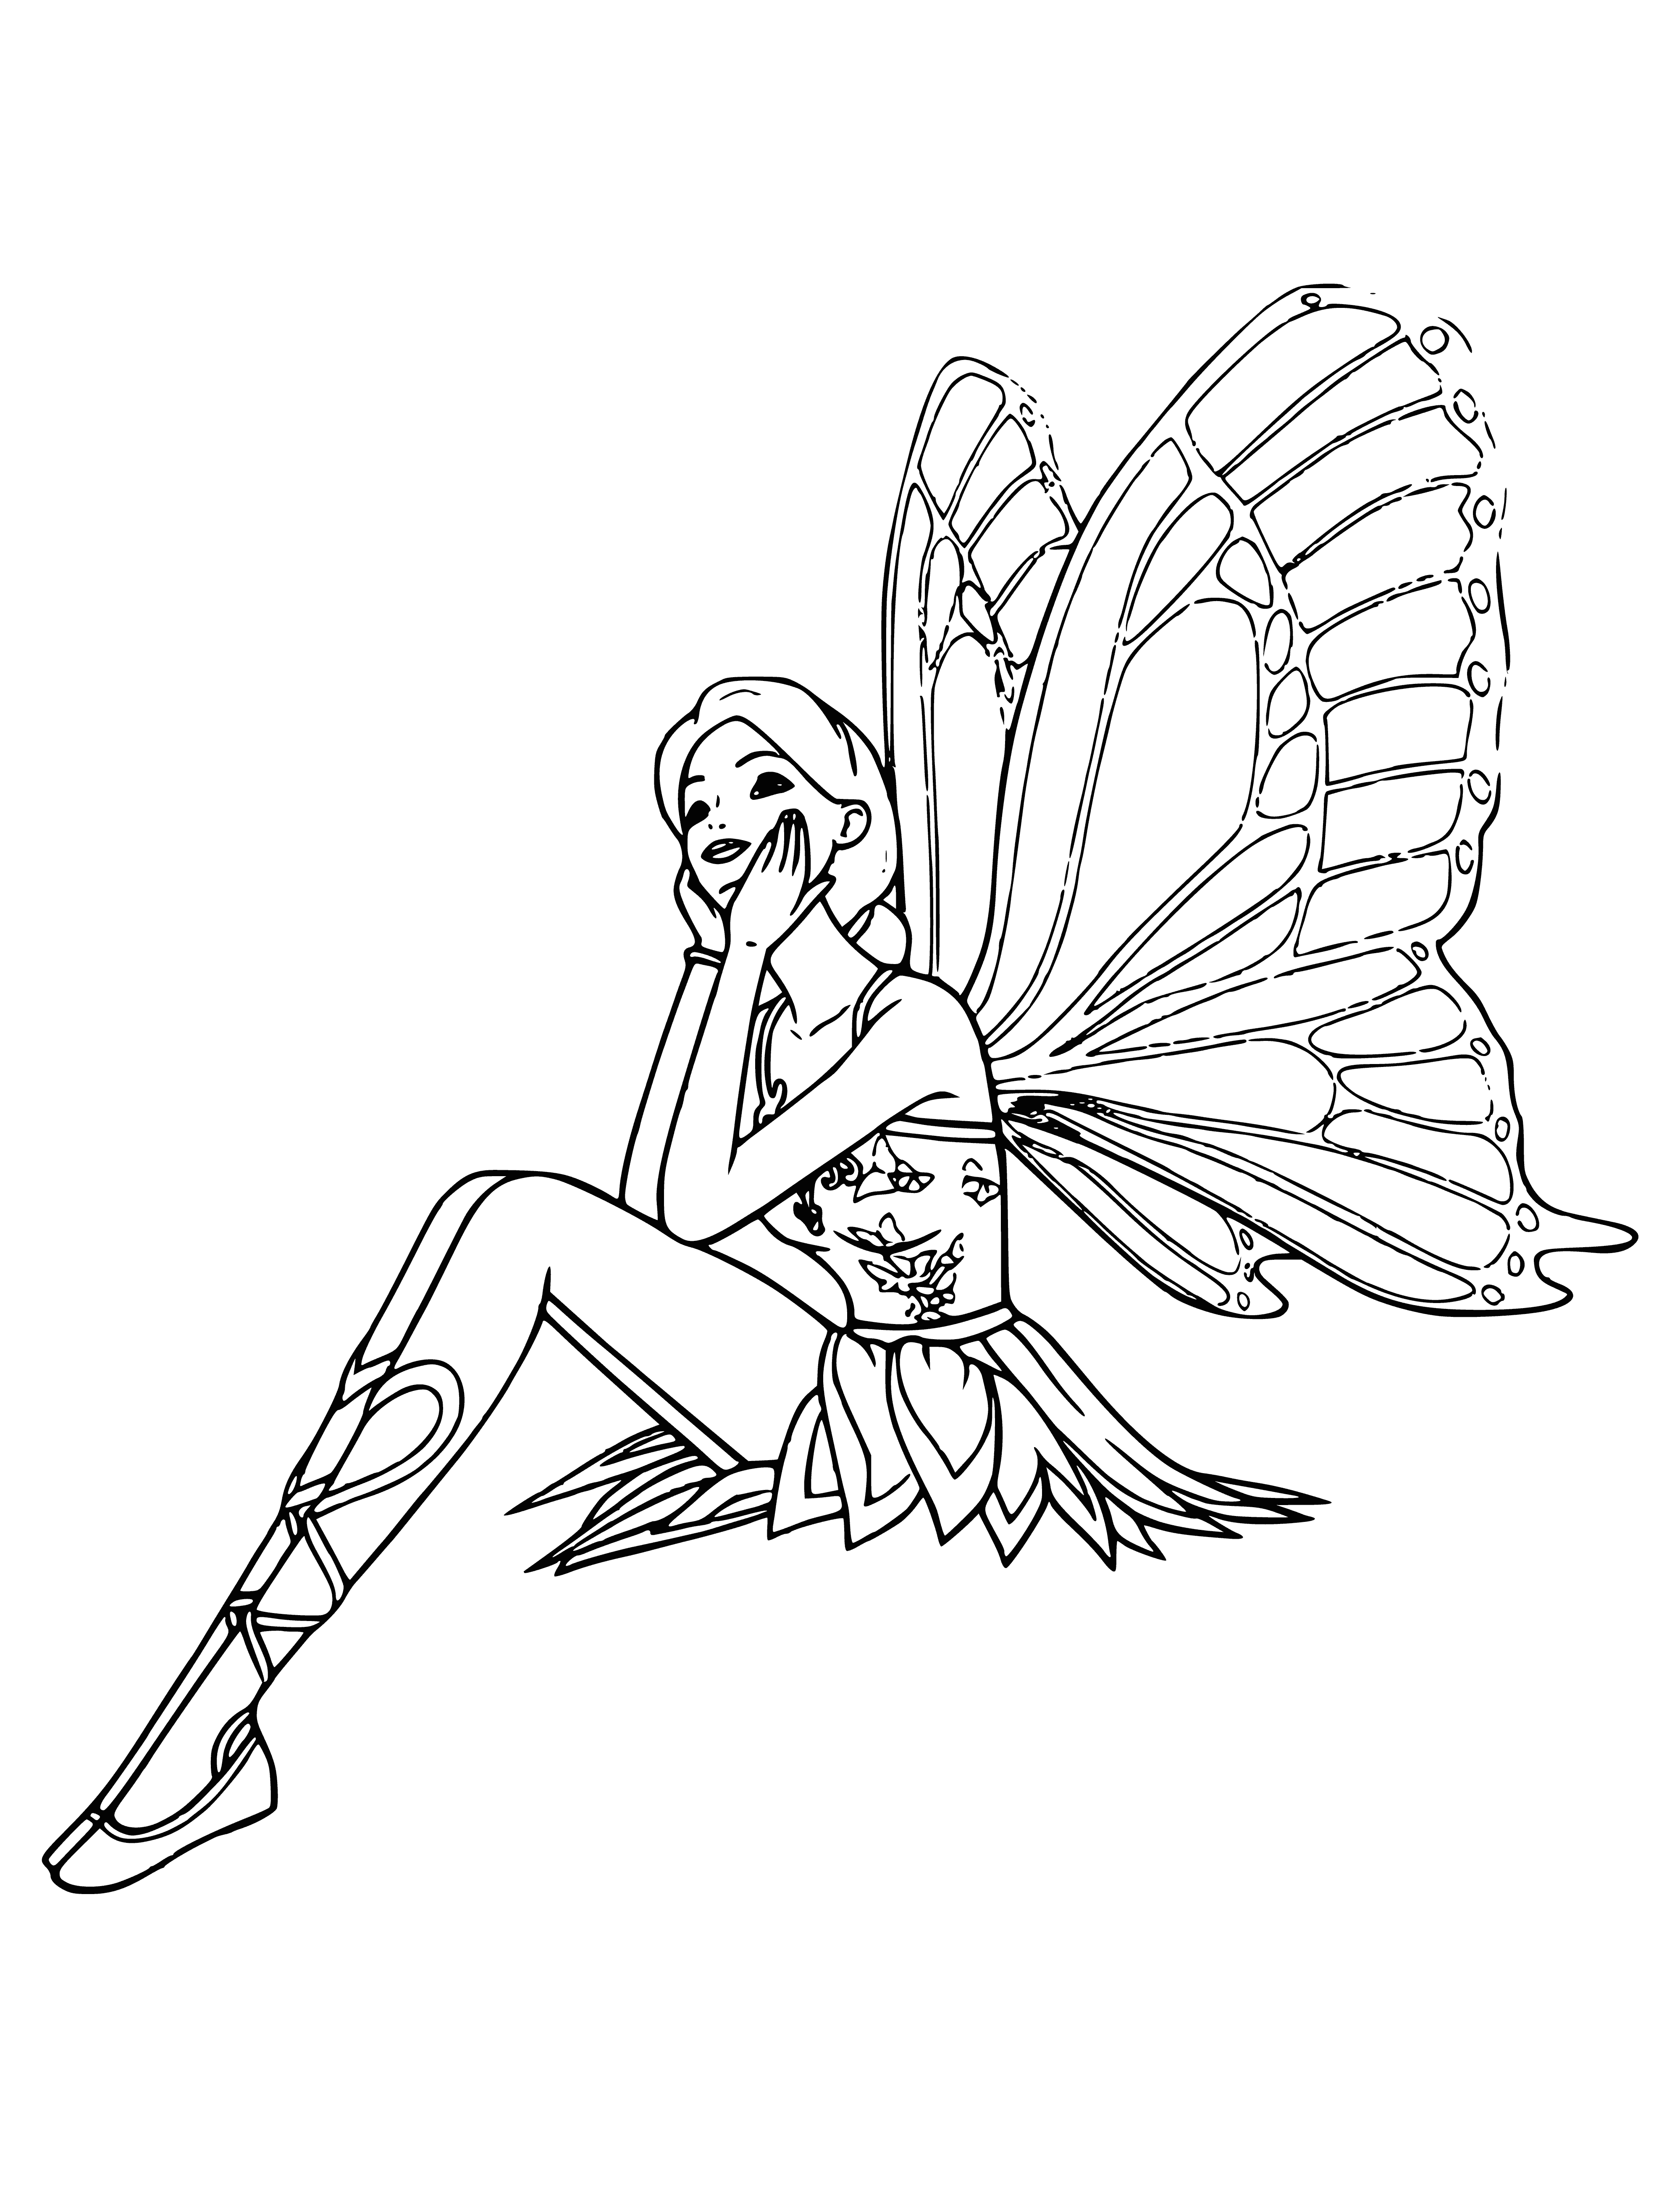 coloring page: Barbie ready to be a Fairy w/ glittery dress, wings, updo, & fairy dust wand: ready to sprinkle magic wherever she goes! #DreamBig #FairyMagic